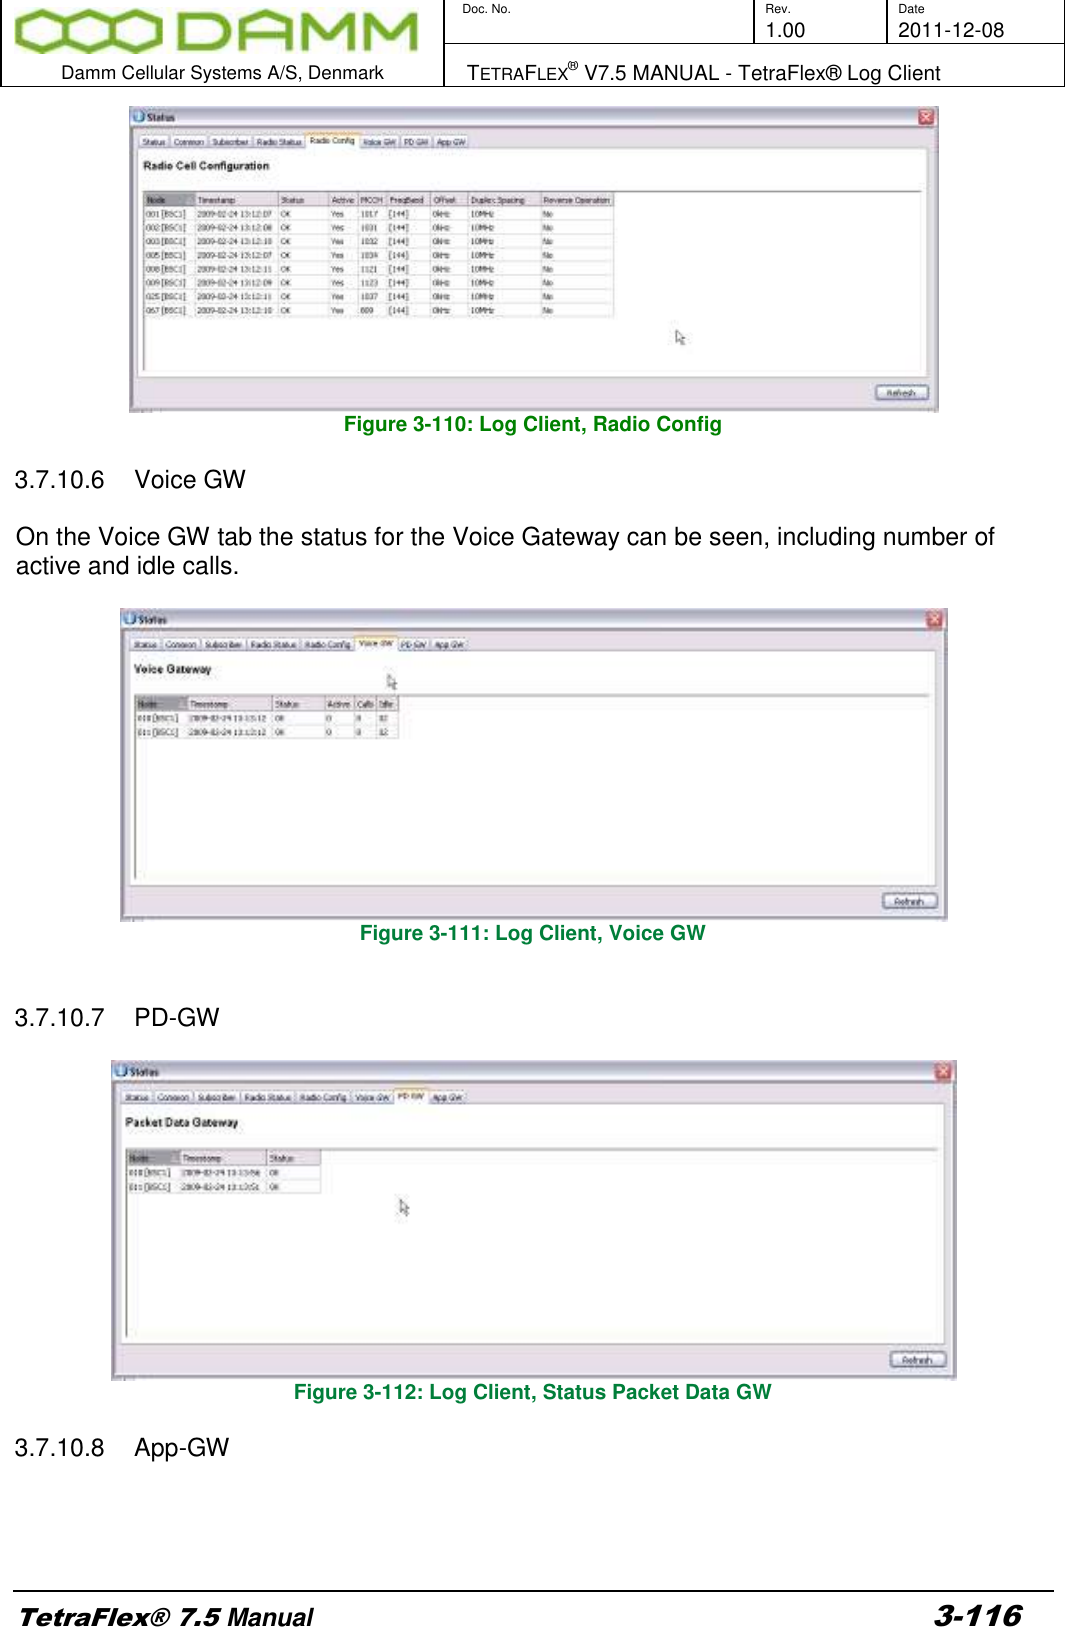        Doc. No. Rev. Date     1.00 2011-12-08  Damm Cellular Systems A/S, Denmark   TETRAFLEX® V7.5 MANUAL - TetraFlex® Log Client  TetraFlex® 7.5 Manual 3-116  Figure 3-110: Log Client, Radio Config  3.7.10.6  Voice GW  On the Voice GW tab the status for the Voice Gateway can be seen, including number of active and idle calls.   Figure 3-111: Log Client, Voice GW   3.7.10.7  PD-GW   Figure 3-112: Log Client, Status Packet Data GW  3.7.10.8  App-GW   